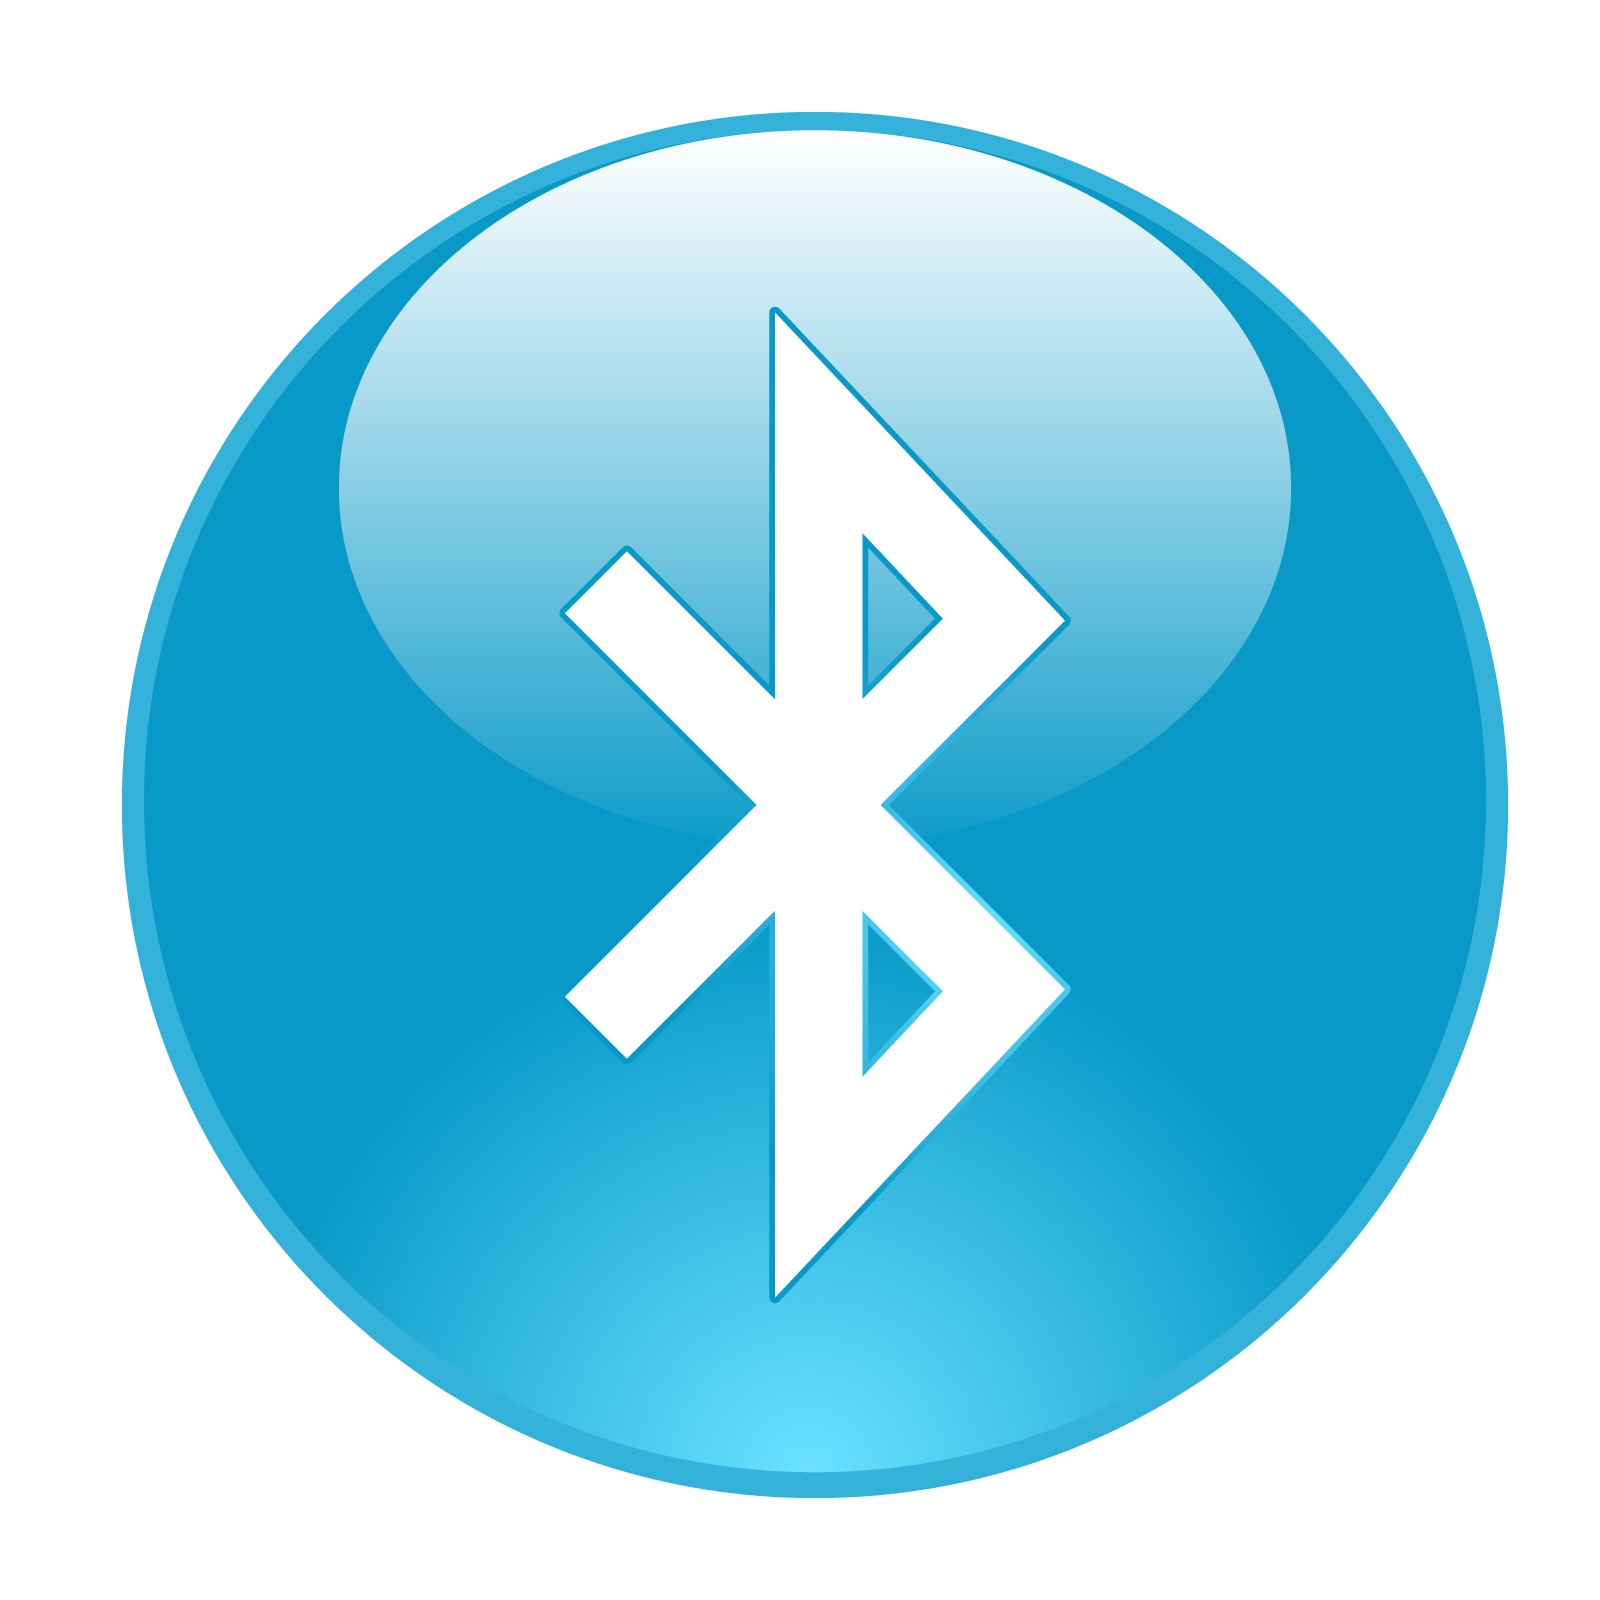 devices quickly and securely sync with Bluetooth enabled 